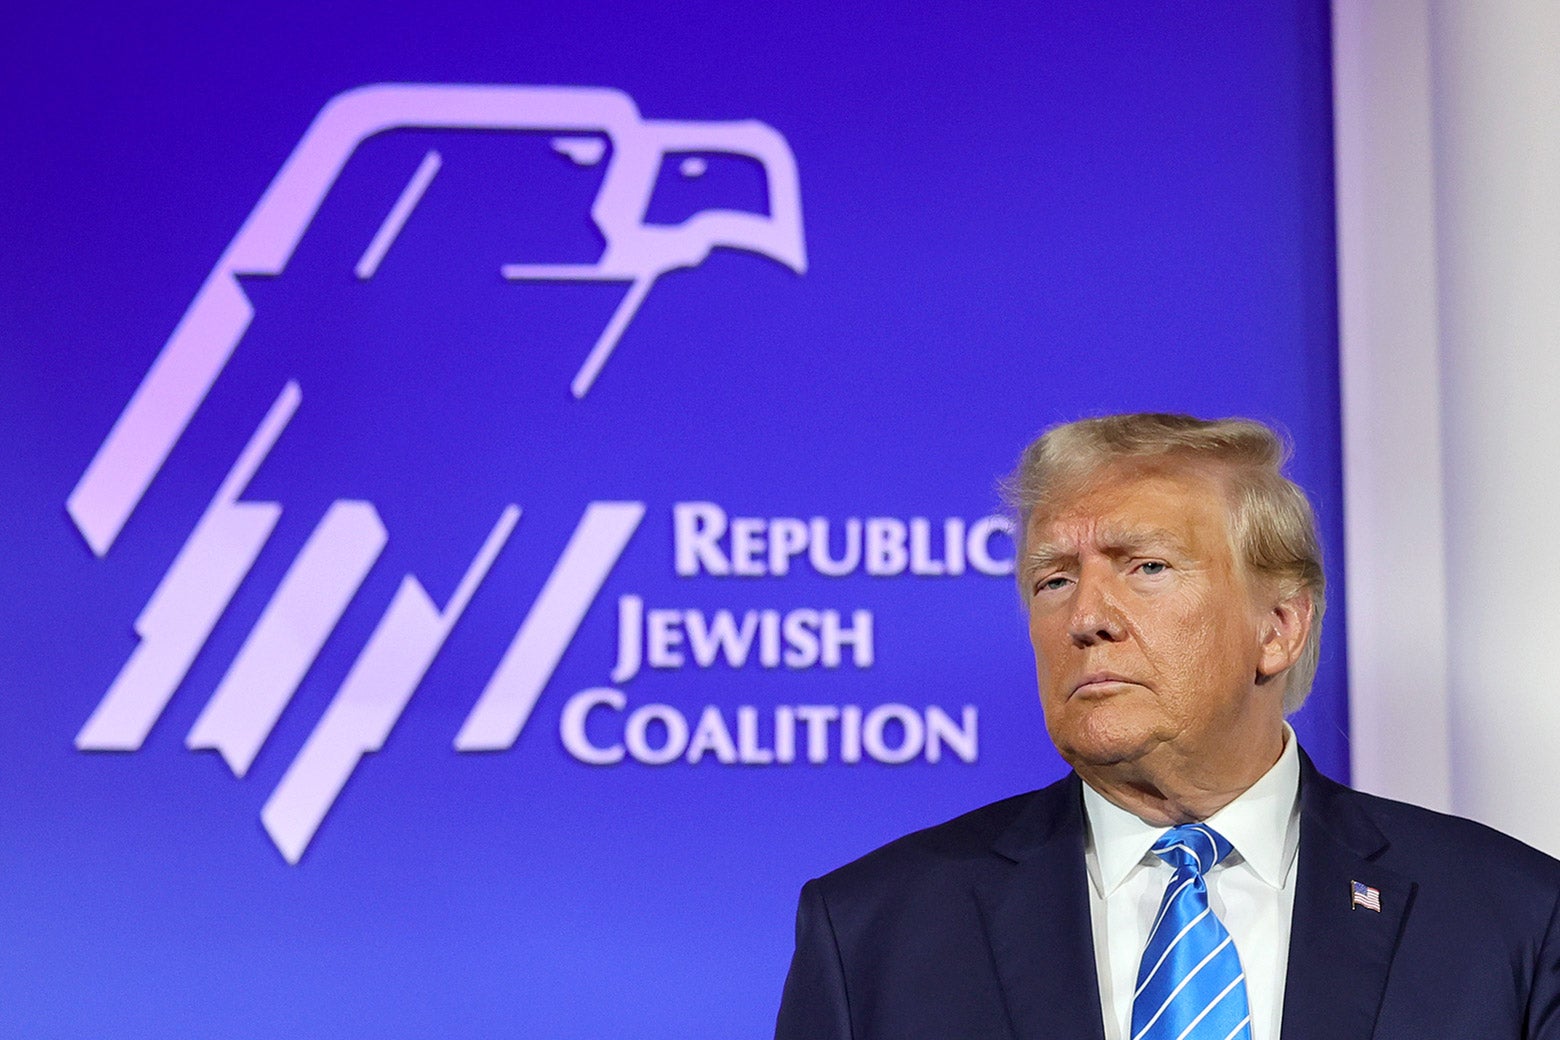 Trump furrows his brow and frowns in front of the logo for the Republican Jewish Coalition, an eagle with a Star of David embedded in it.